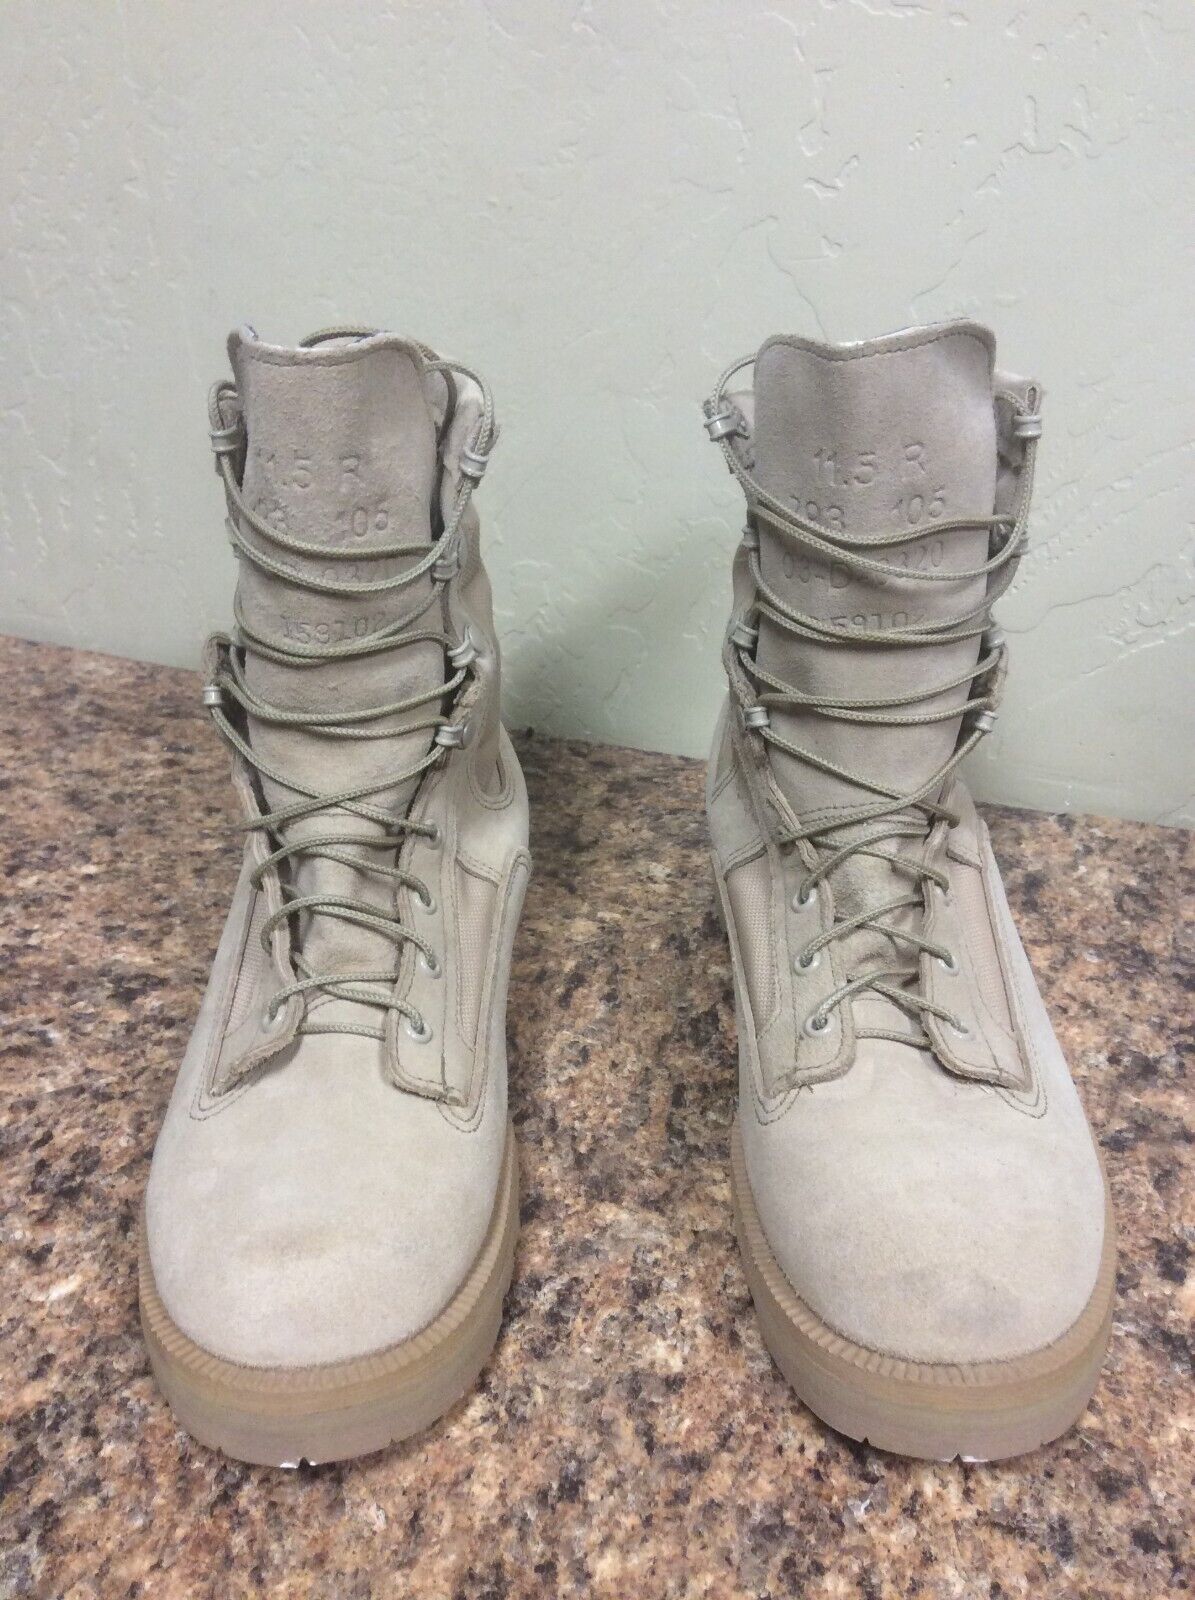 WELLCO MILITARY BOOTS GORE-TEX TEMPERATE WEATHER DESERT TAN SIZE 11.5R